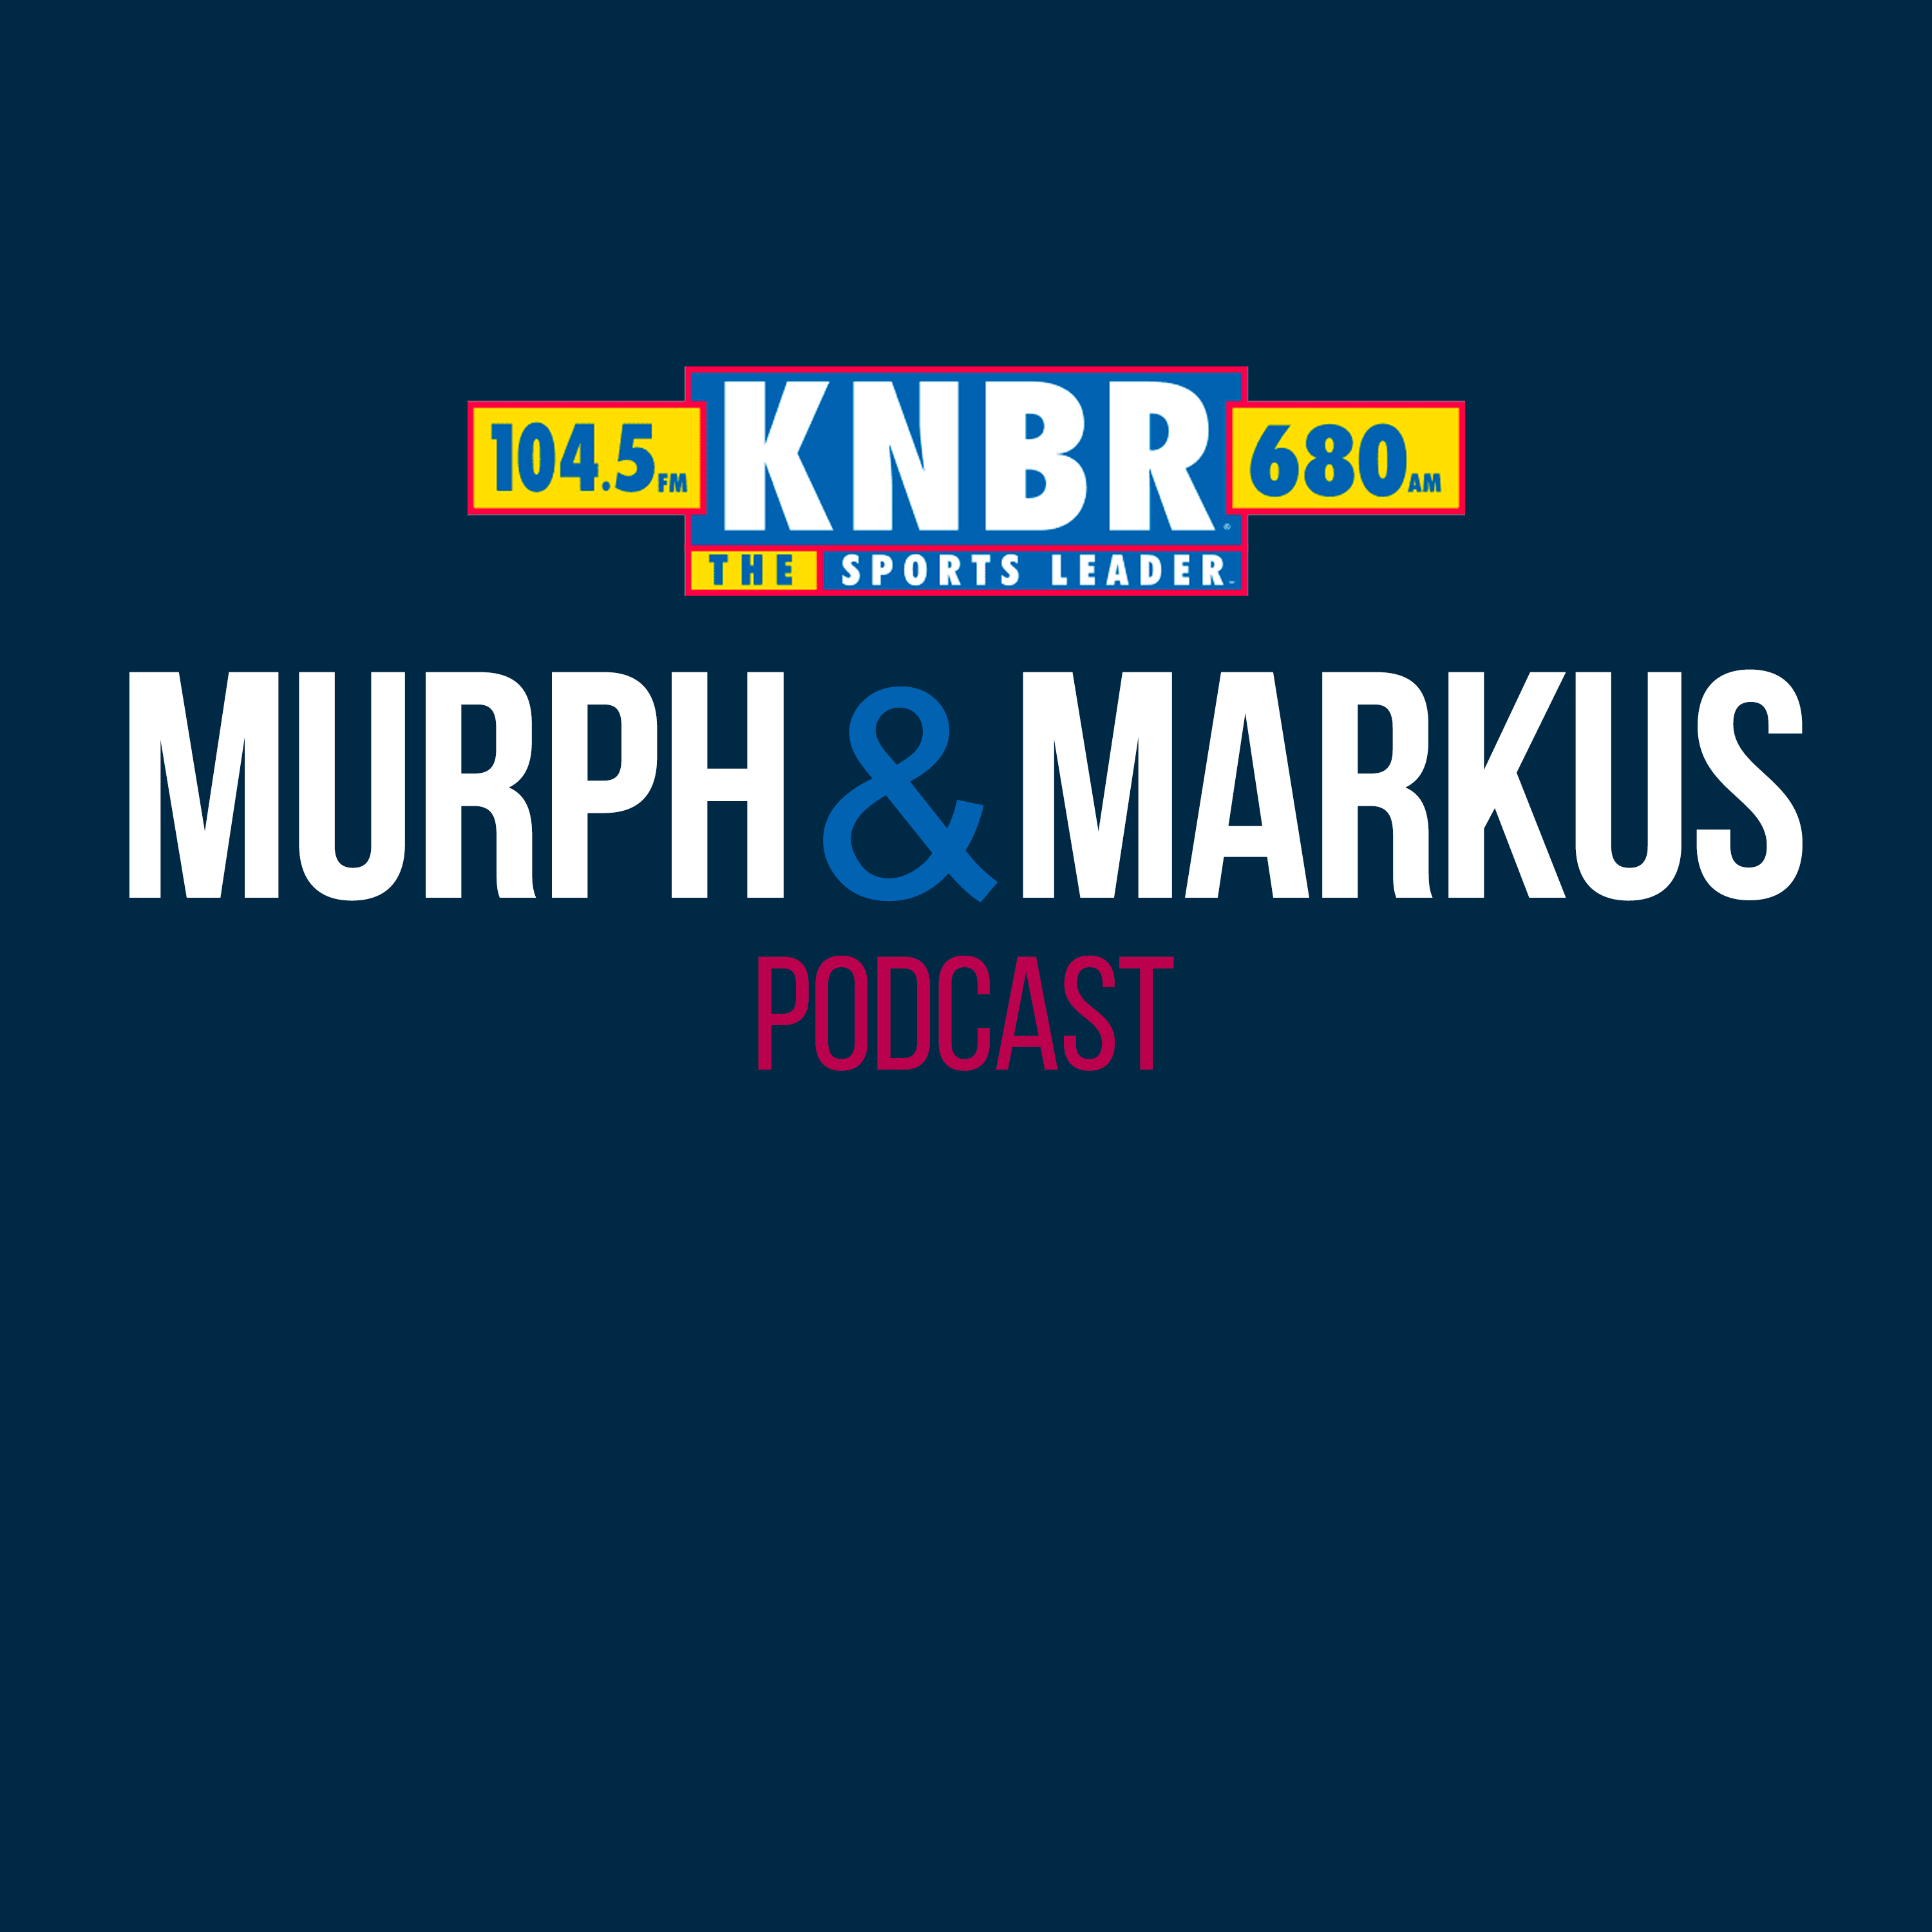 1-2 Fred Warner joins Murph and Markus to discuss what securing the No. 1 seed means to the 49ers and how impressive Brock Purdy's journey is